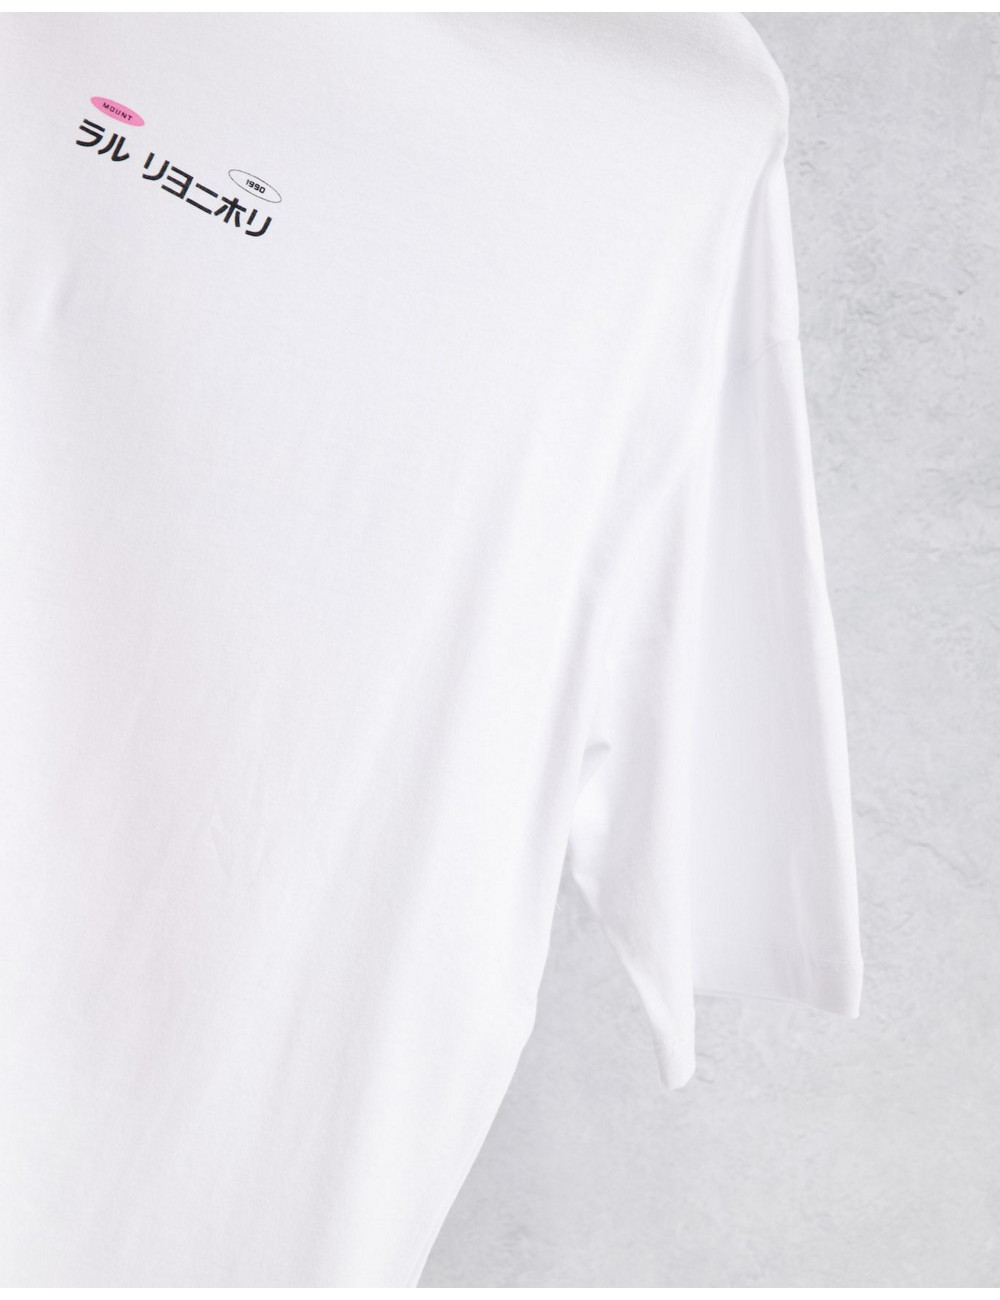 Jack & Jones Originals oversized t-shirt with mountain back print in white